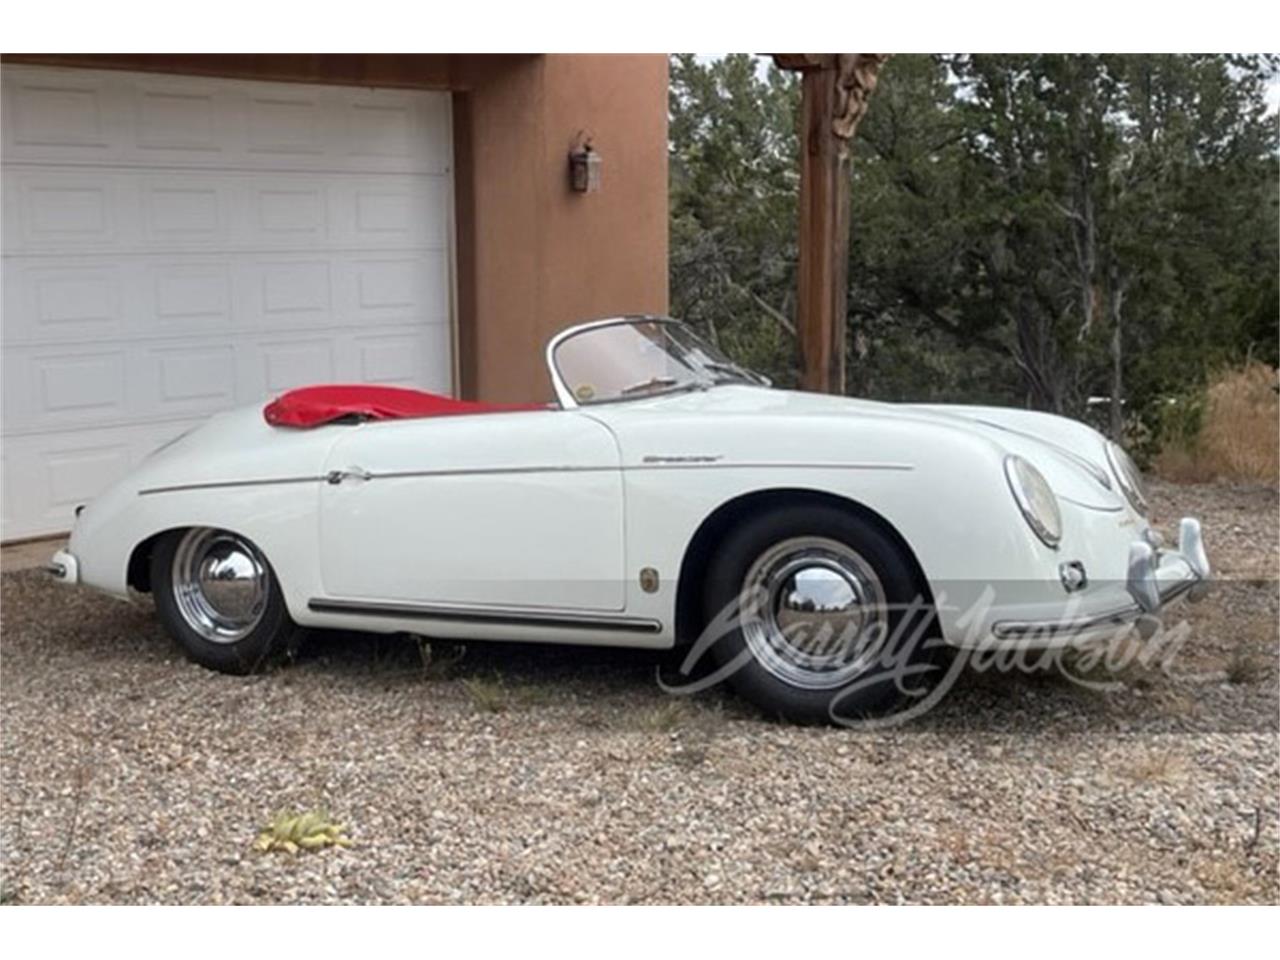 For Sale at Auction: 1955 Porsche 356 in Scottsdale, Arizona for sale in Scottsdale, AZ